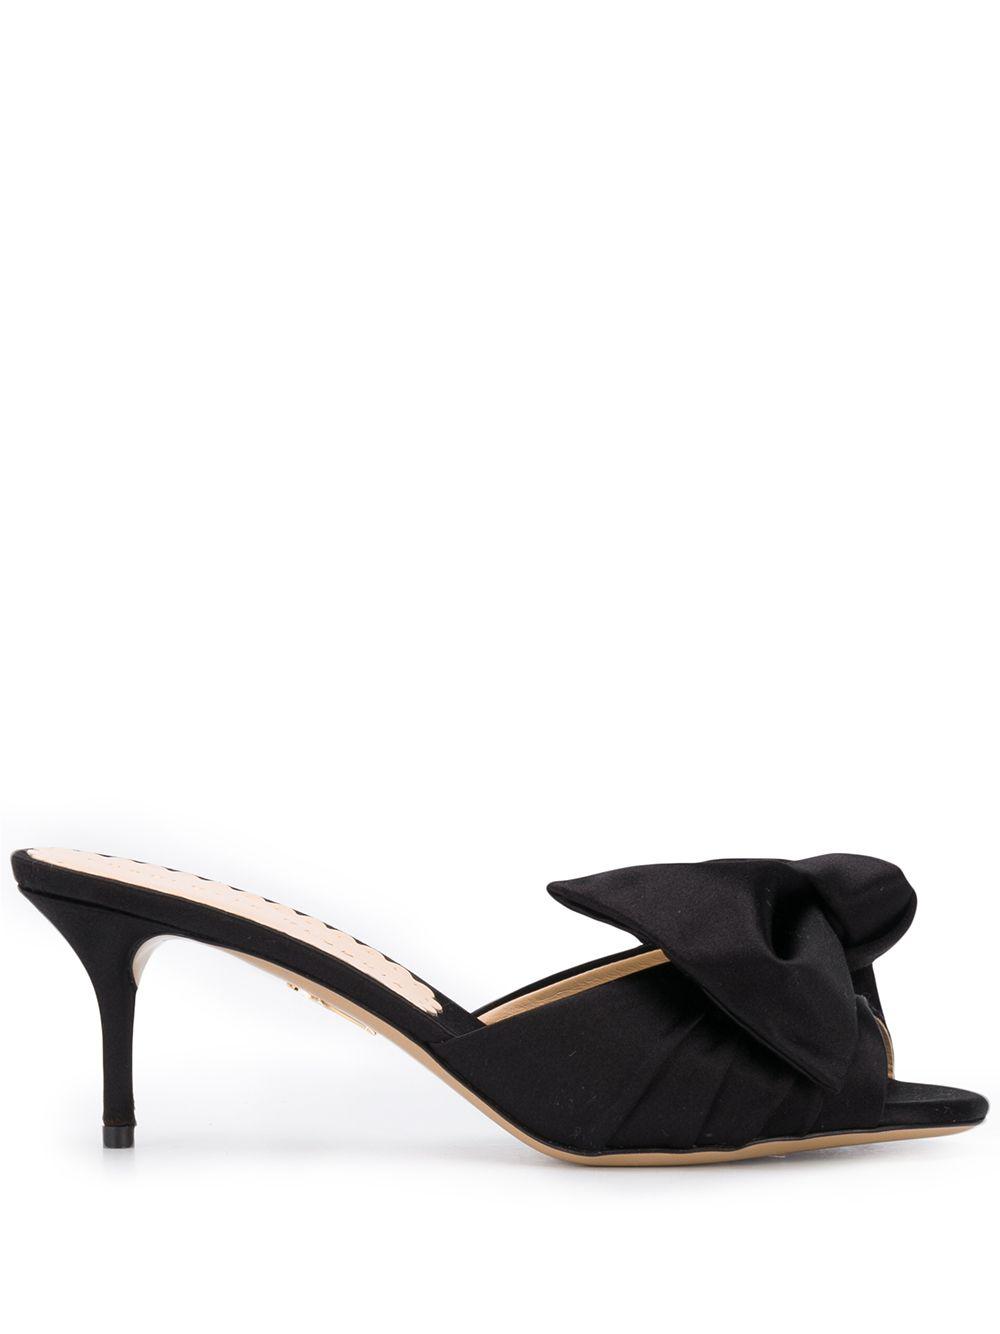 Drew satin sandals by CHARLOTTE OLYMPIA